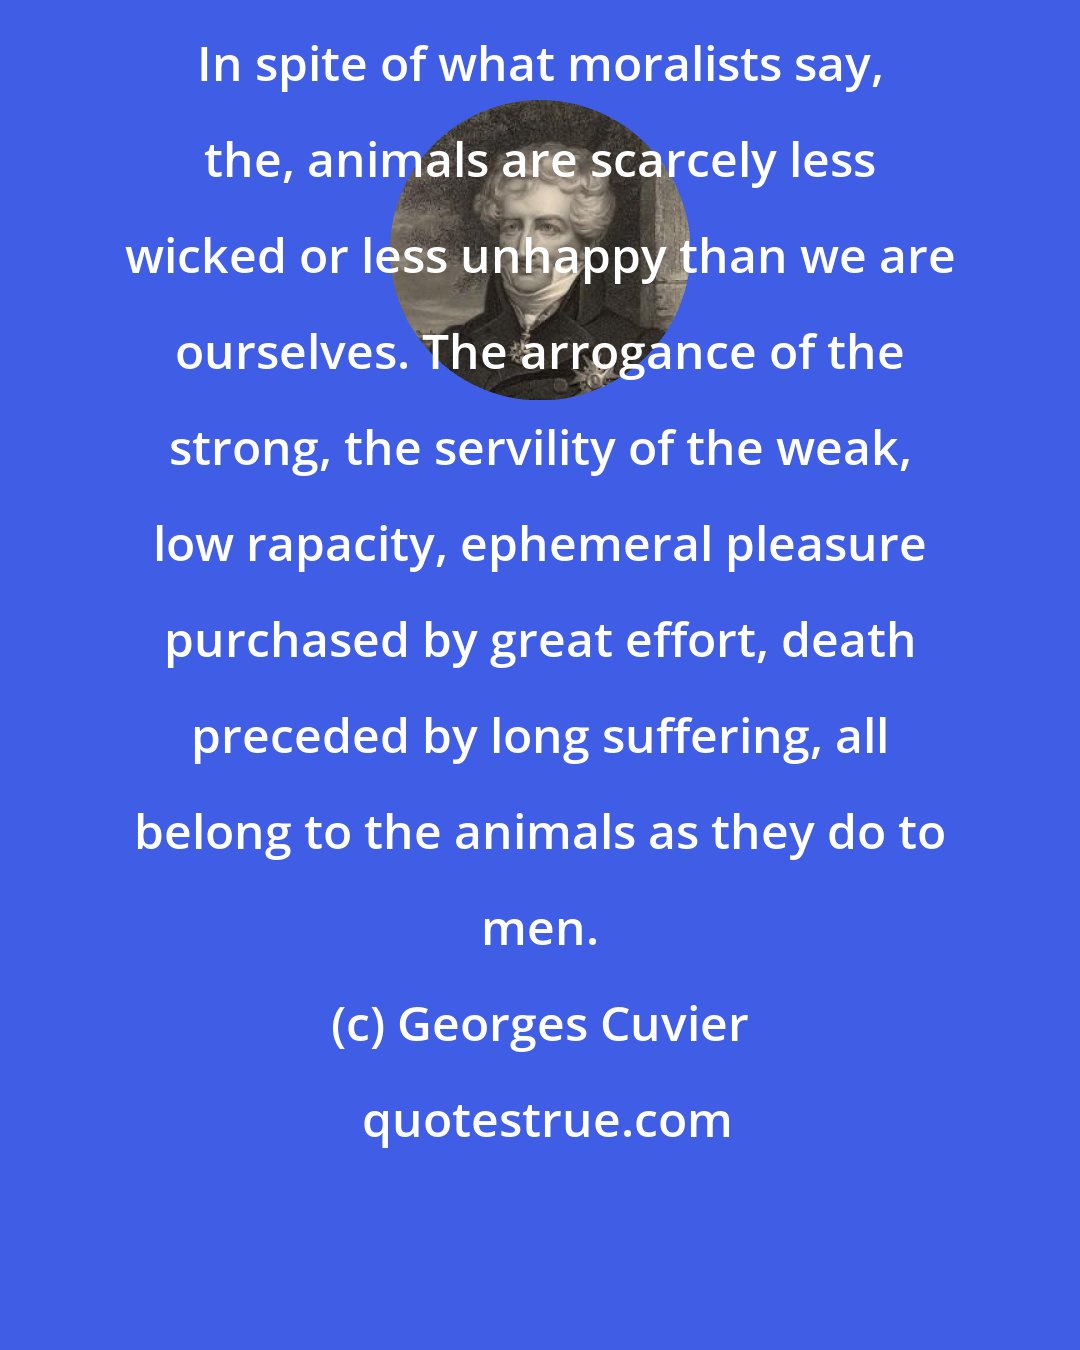 Georges Cuvier: In spite of what moralists say, the, animals are scarcely less wicked or less unhappy than we are ourselves. The arrogance of the strong, the servility of the weak, low rapacity, ephemeral pleasure purchased by great effort, death preceded by long suffering, all belong to the animals as they do to men.